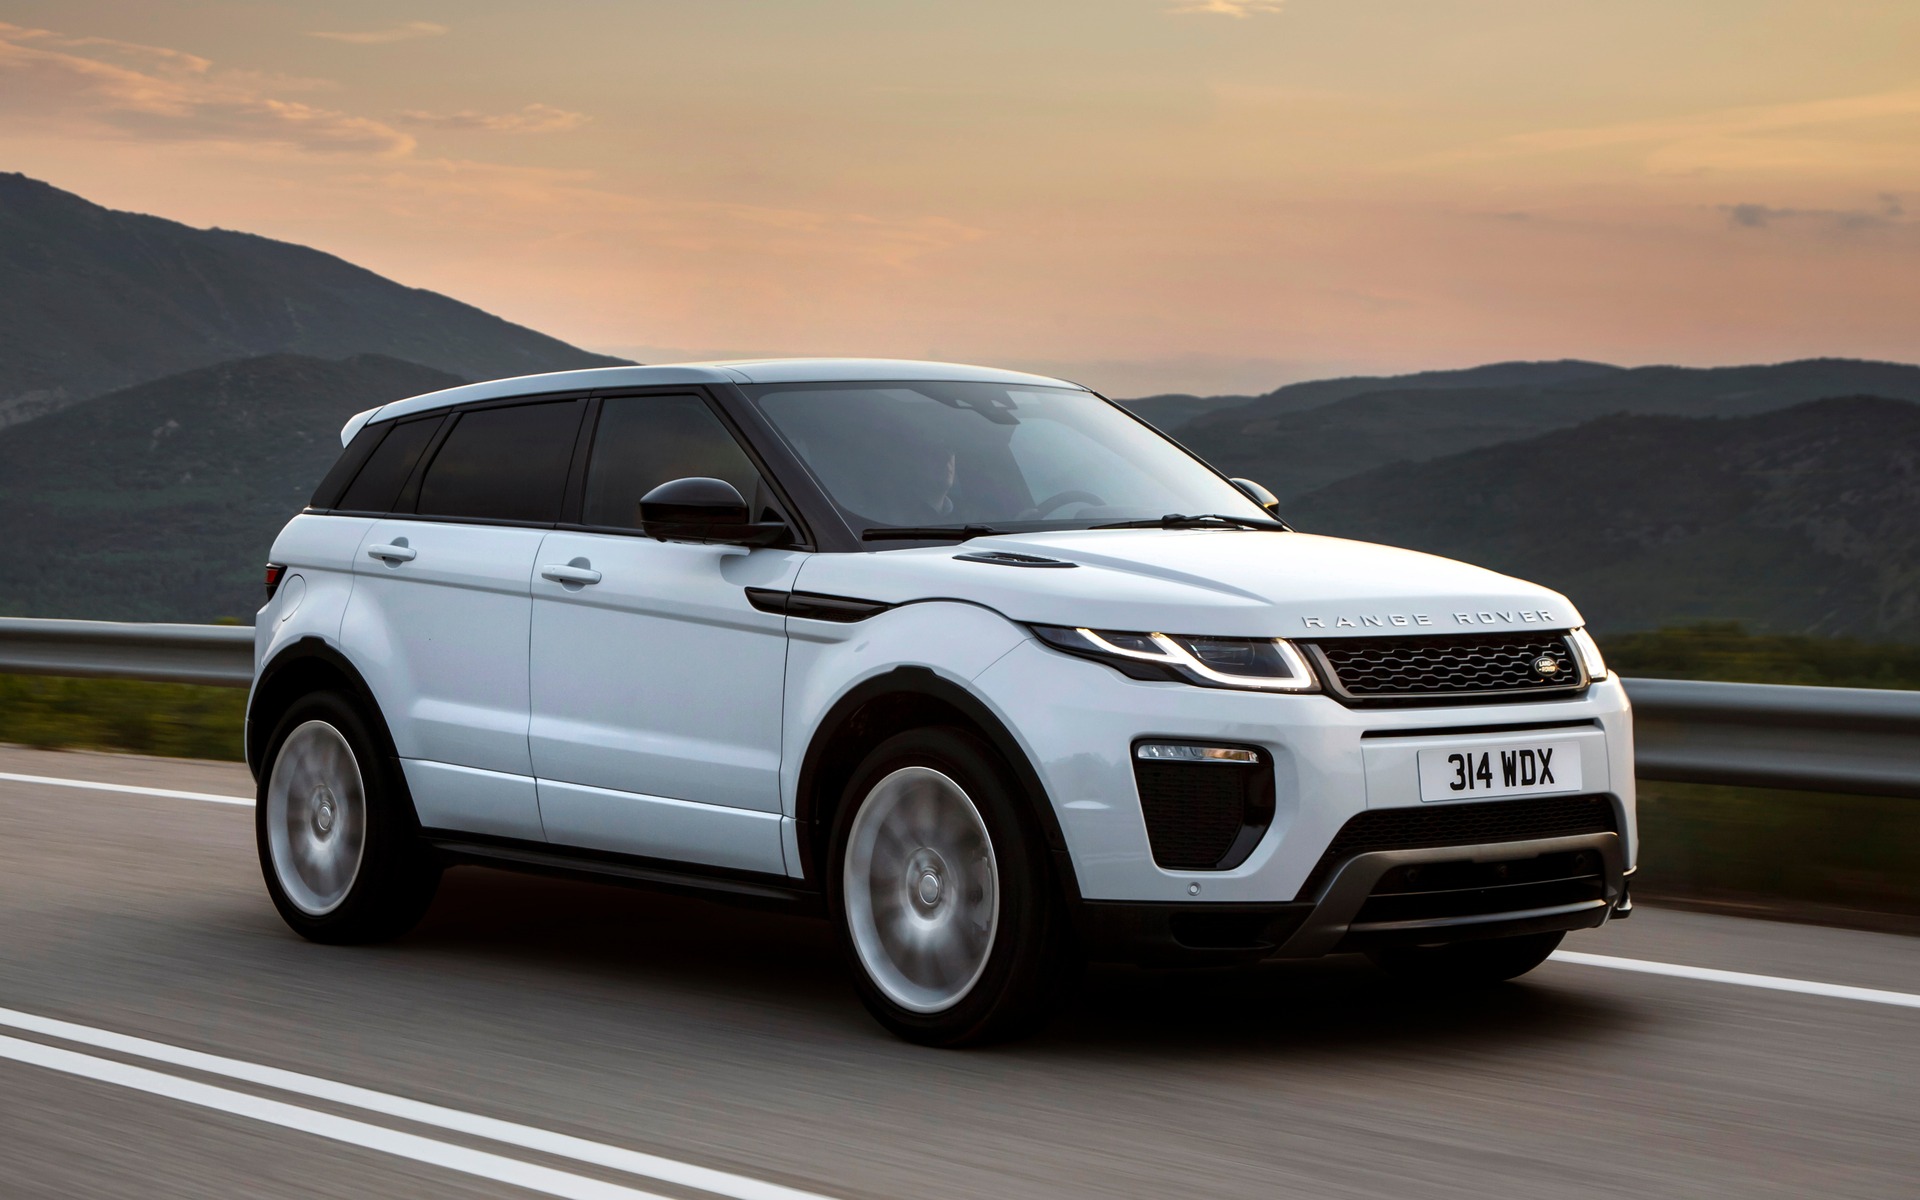 2019 Land Rover Range Rover Evoque News Reviews Picture Galleries And Videos The Car Guide